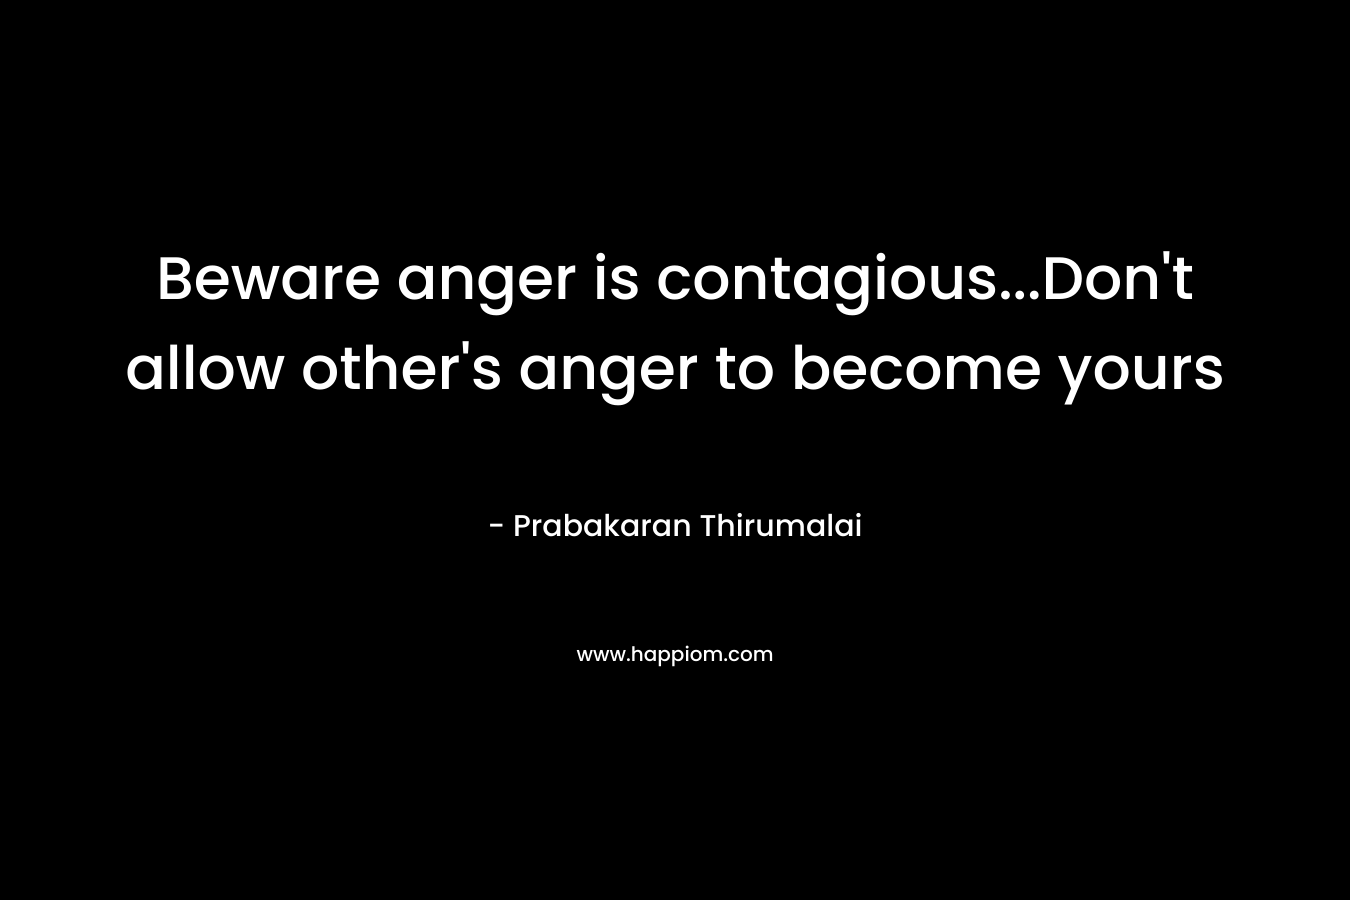 Beware anger is contagious…Don’t allow other’s anger to become yours – Prabakaran Thirumalai